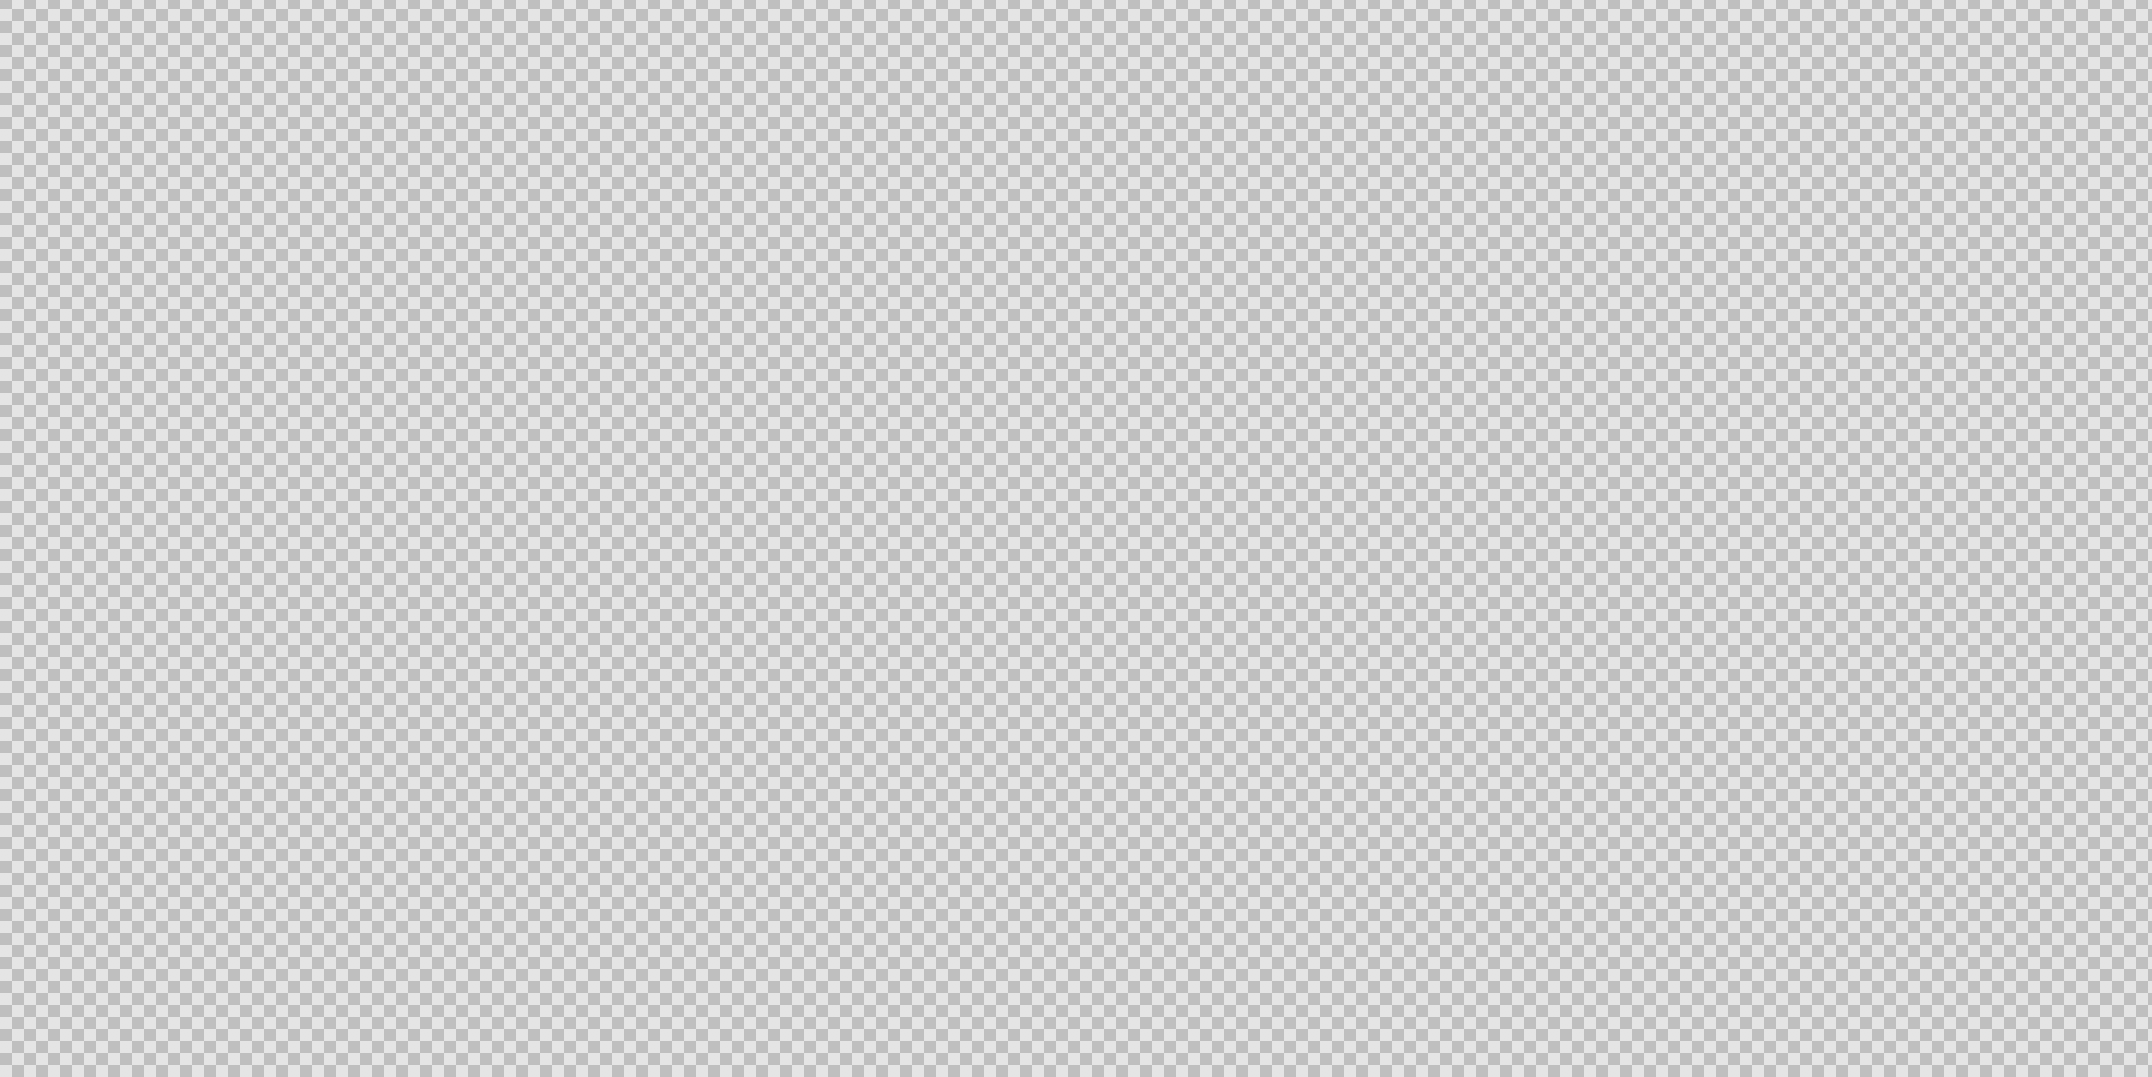 Final Cut Pro X Checkerboard Player Background